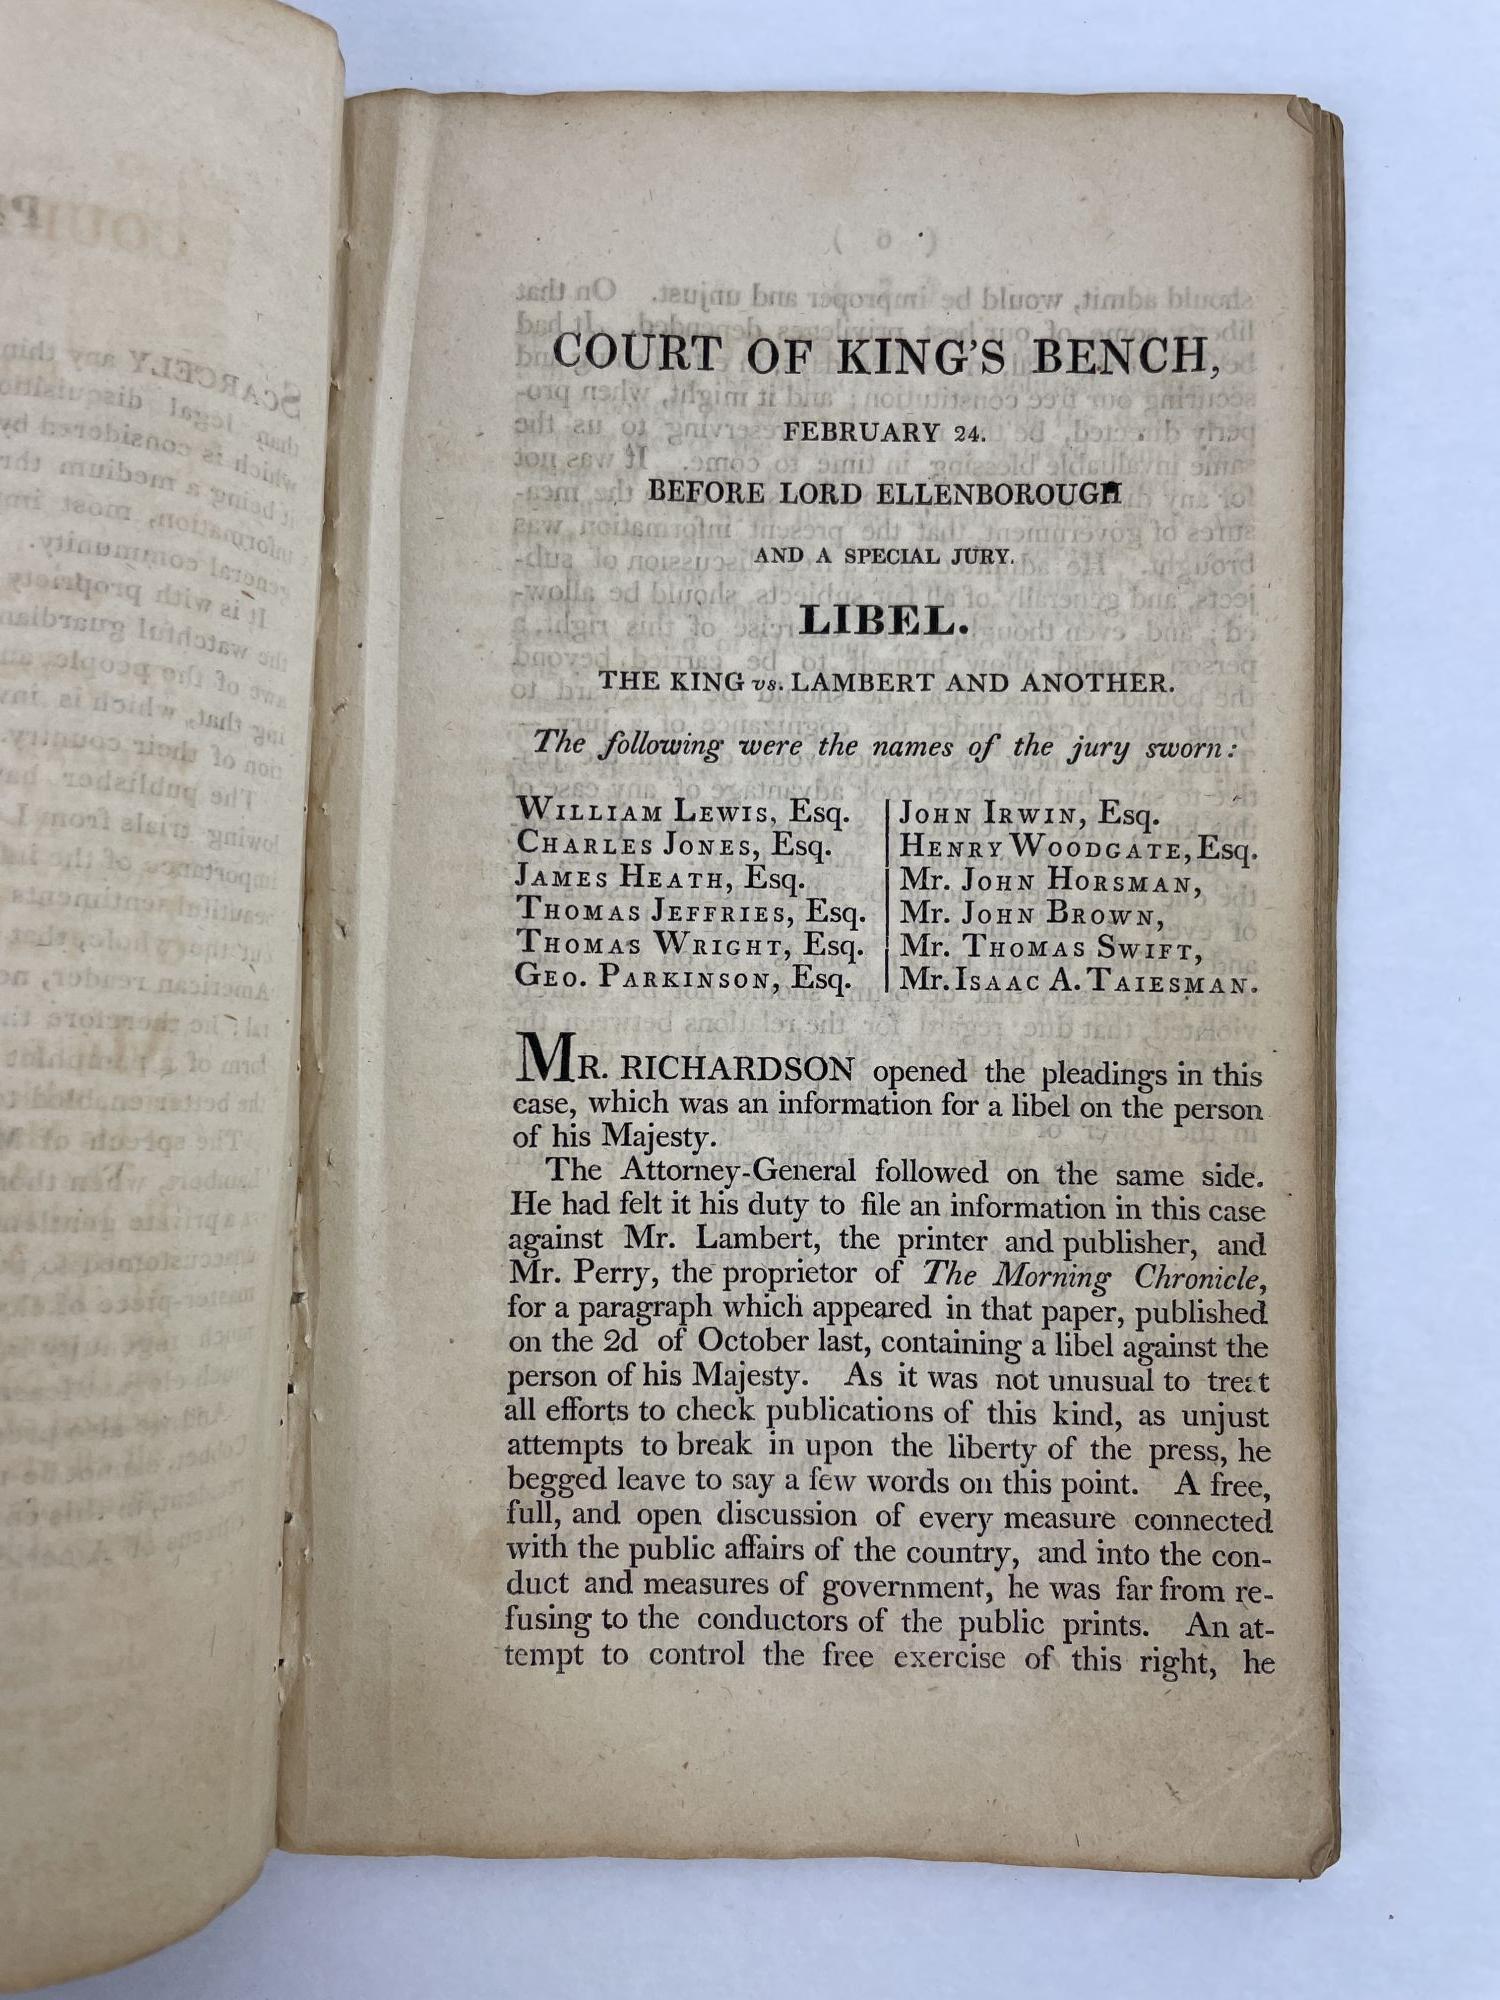 Product Image for Trial of Messrs. Lambert & Perry. To Which Also is Added, the Trial of William Cobbet, for Libelling His Present Majesty, George III